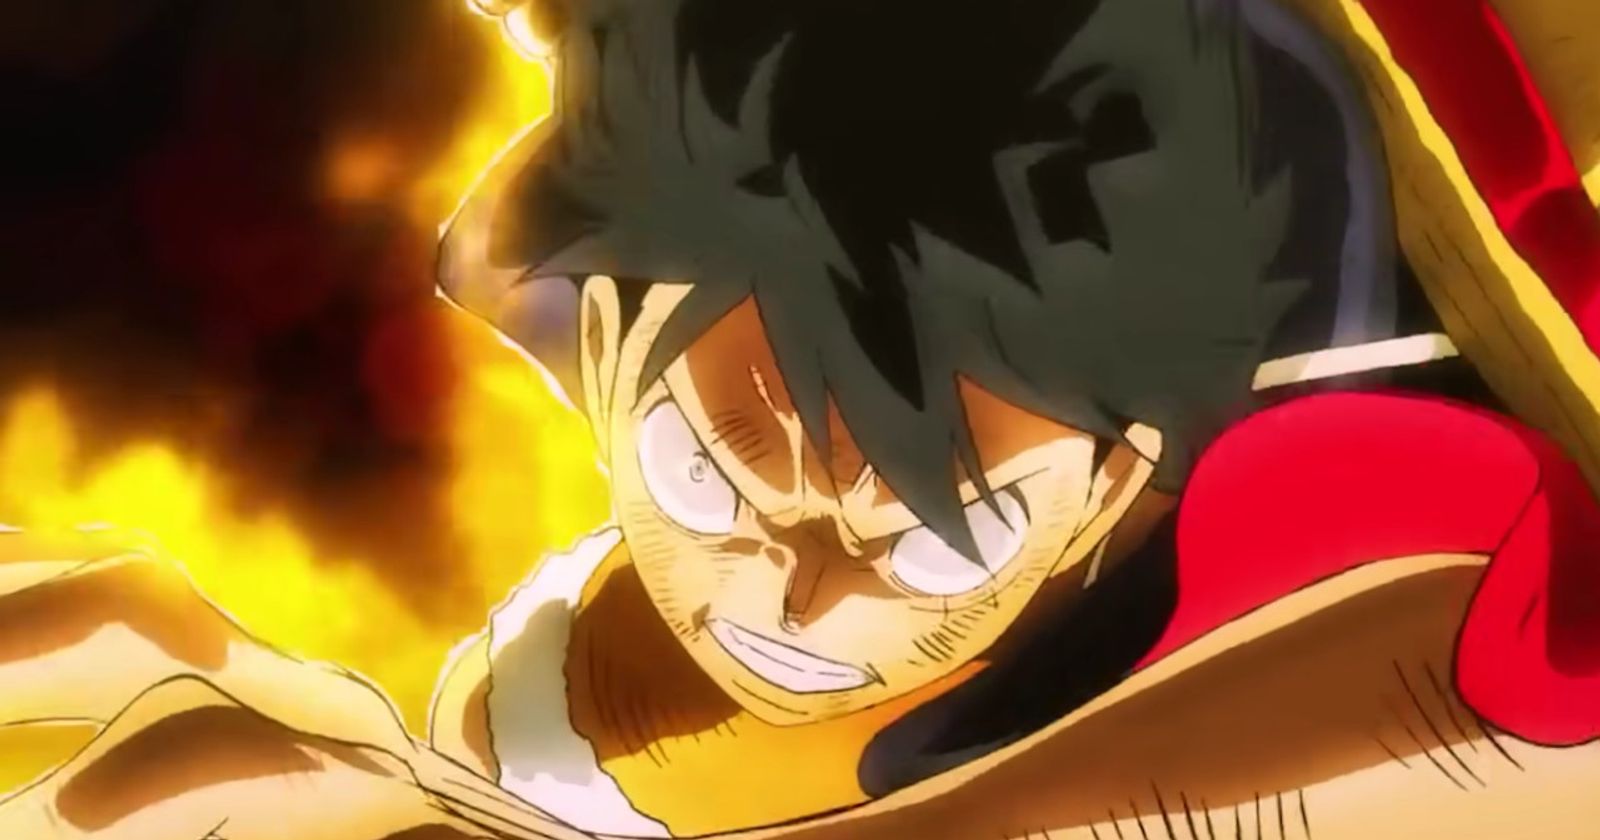 One Piece Episode 1033: More Animation Brilliance as Luffy Gives